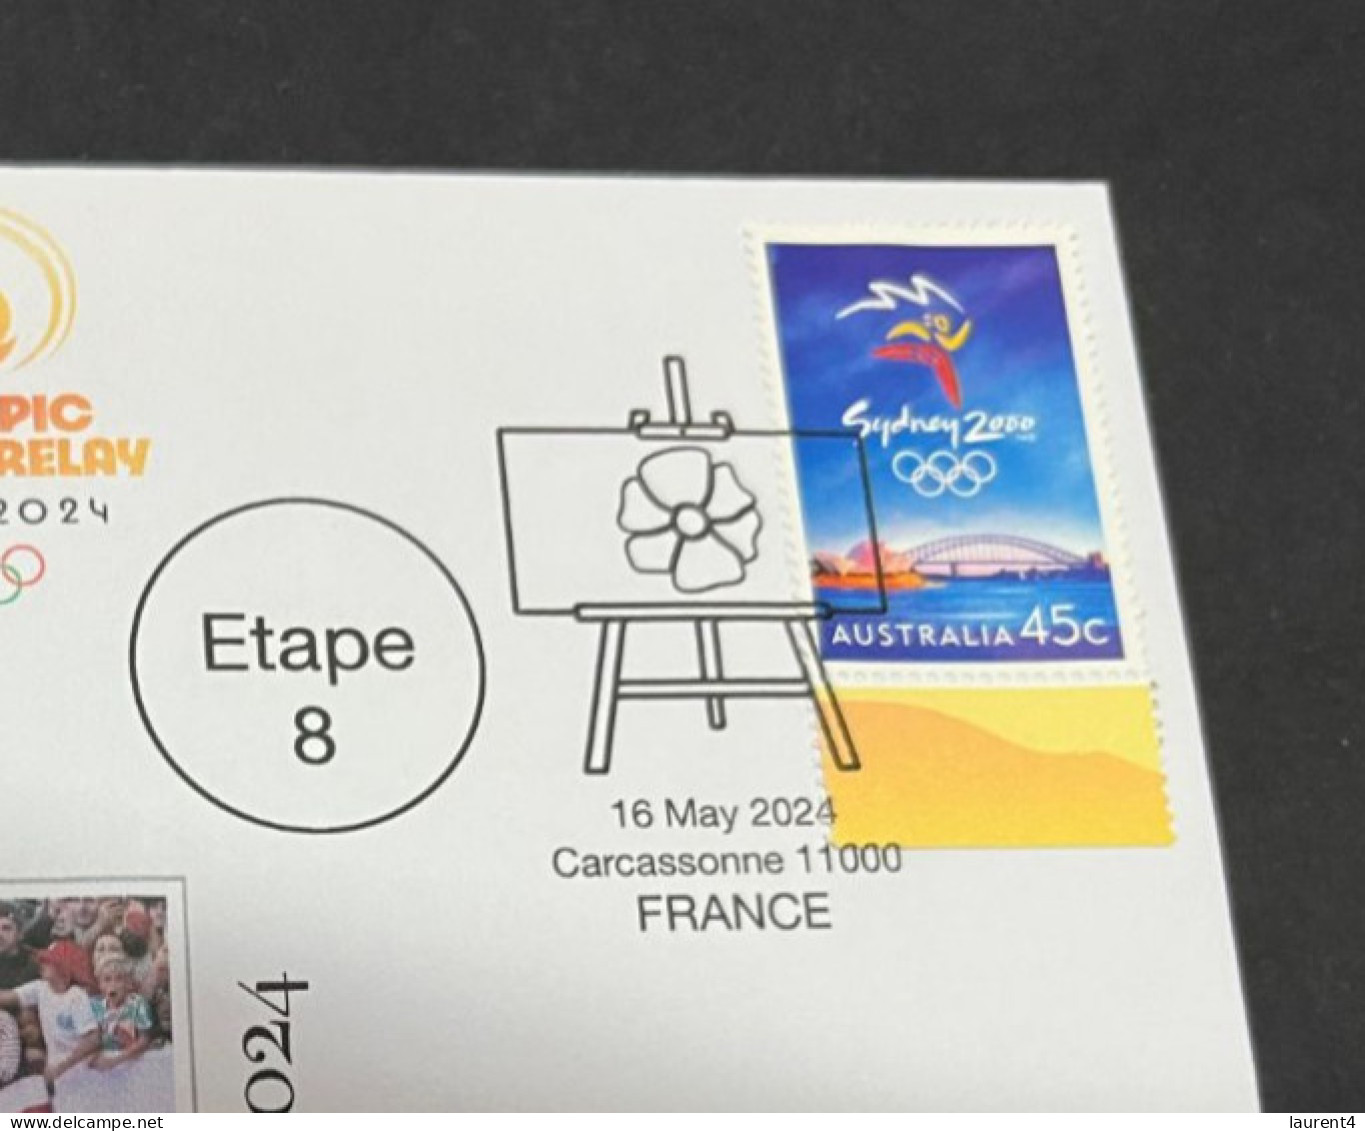 17-5-2024 (5 Z 17) Paris Olympic Games 2024 - Torch Relay (Etape 8) In Carcassonne (16-5-2024) With OLYMPIC Stamp - Summer 2024: Paris